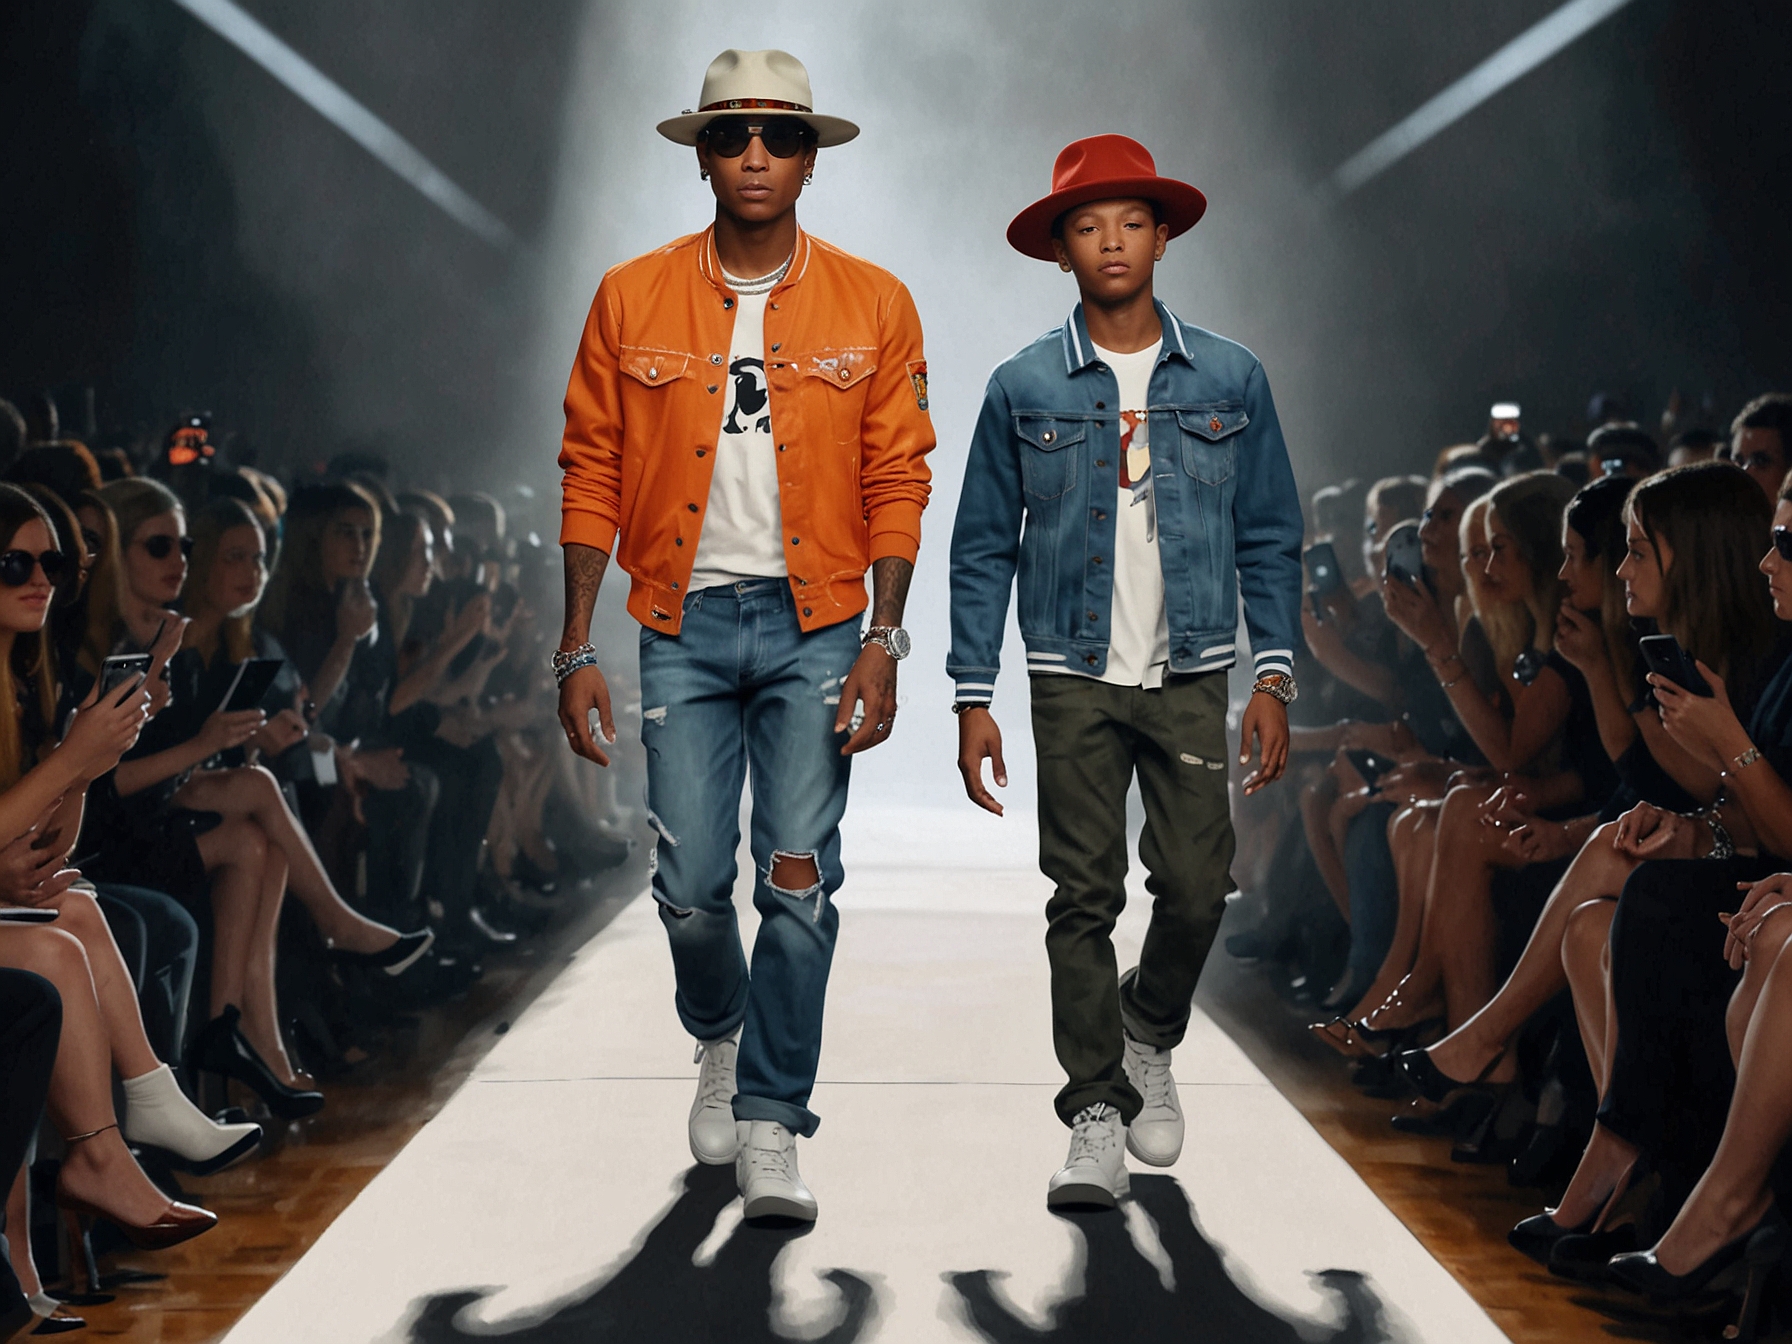 Pharrell Williams and his 13-year-old son Rocket make a grand entrance at an exclusive fashion show, with both showcasing their unique and stylish outfits, captivating attendees and cameras alike.